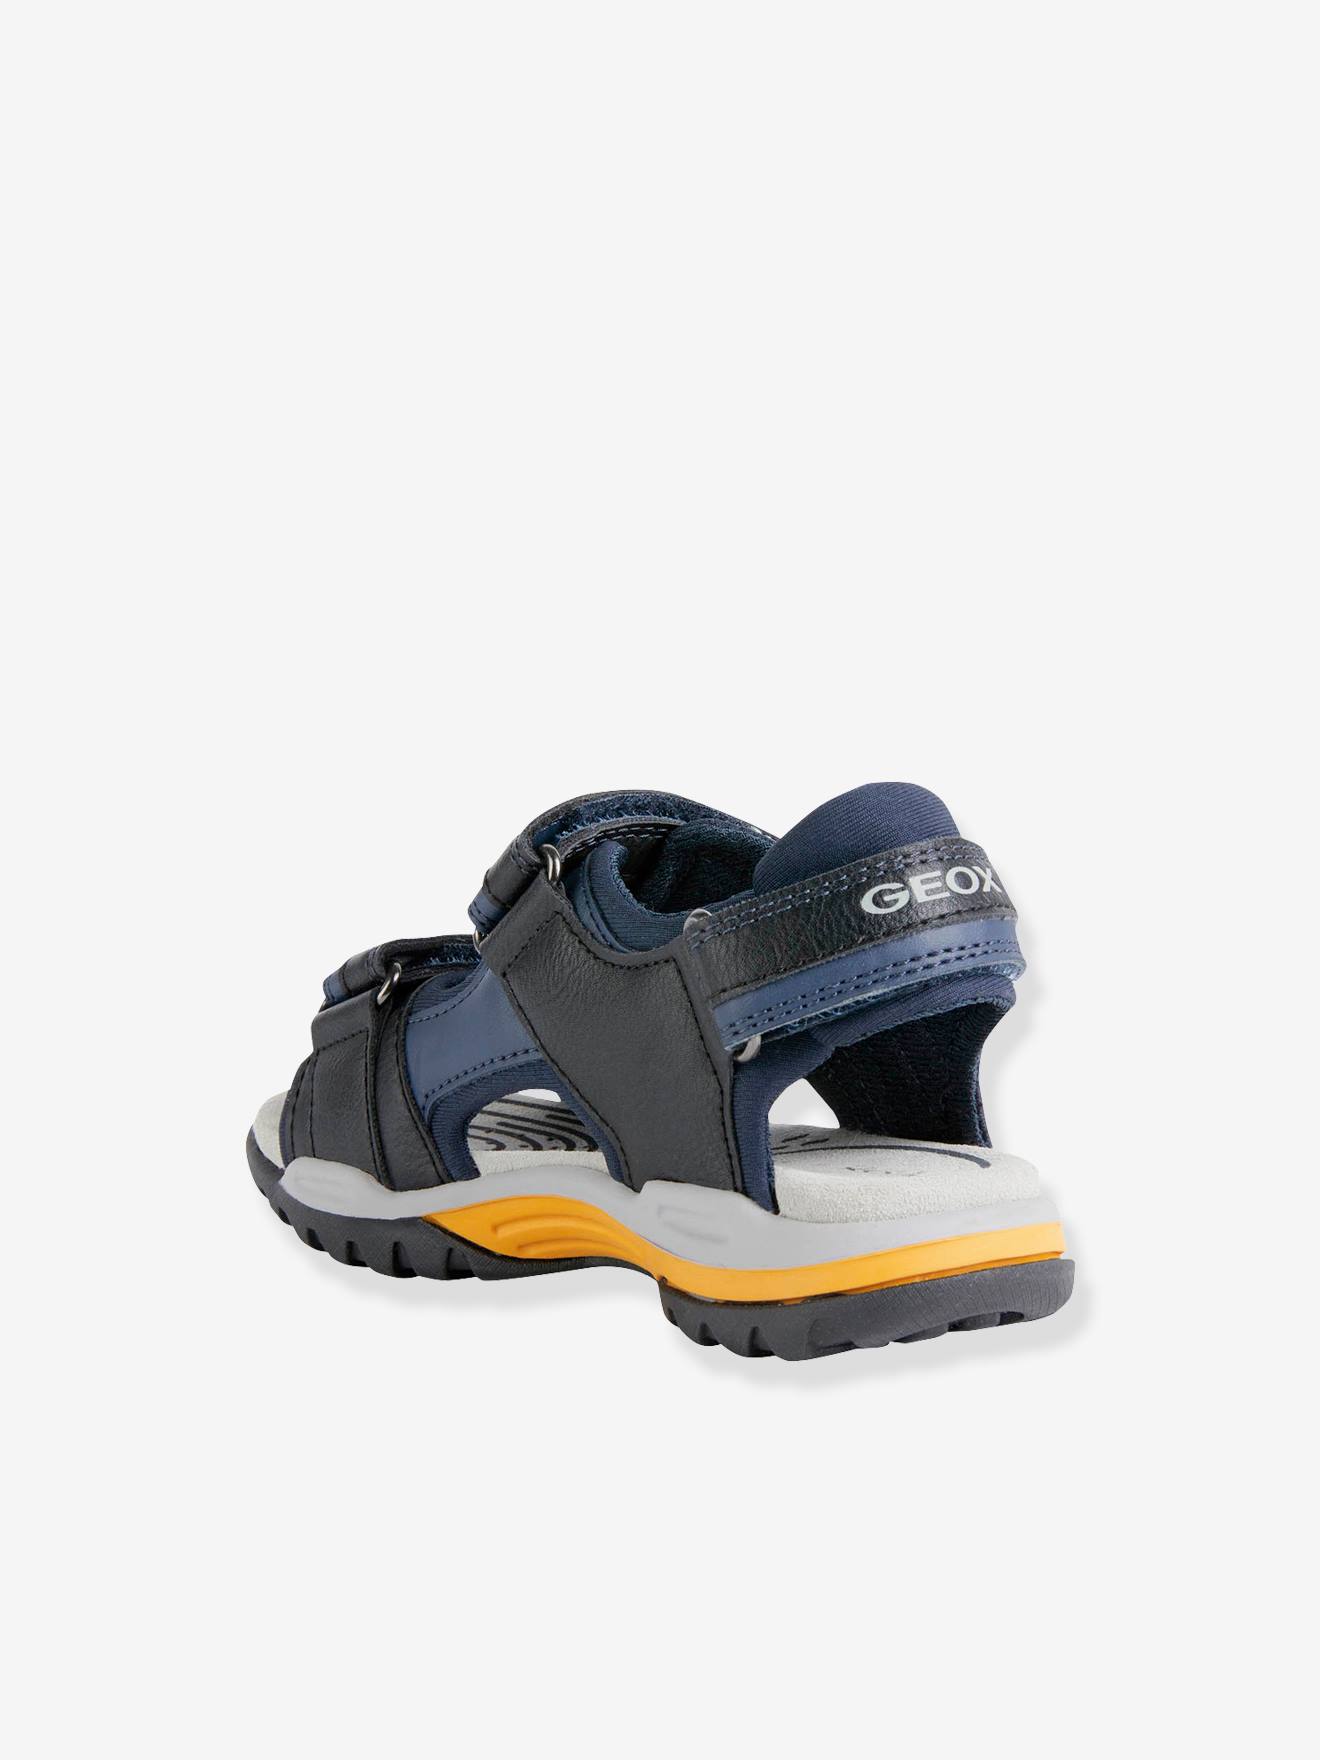 Sandals for Boys, J. Borealis B.A by GEOX® - blue medium solid, Shoes